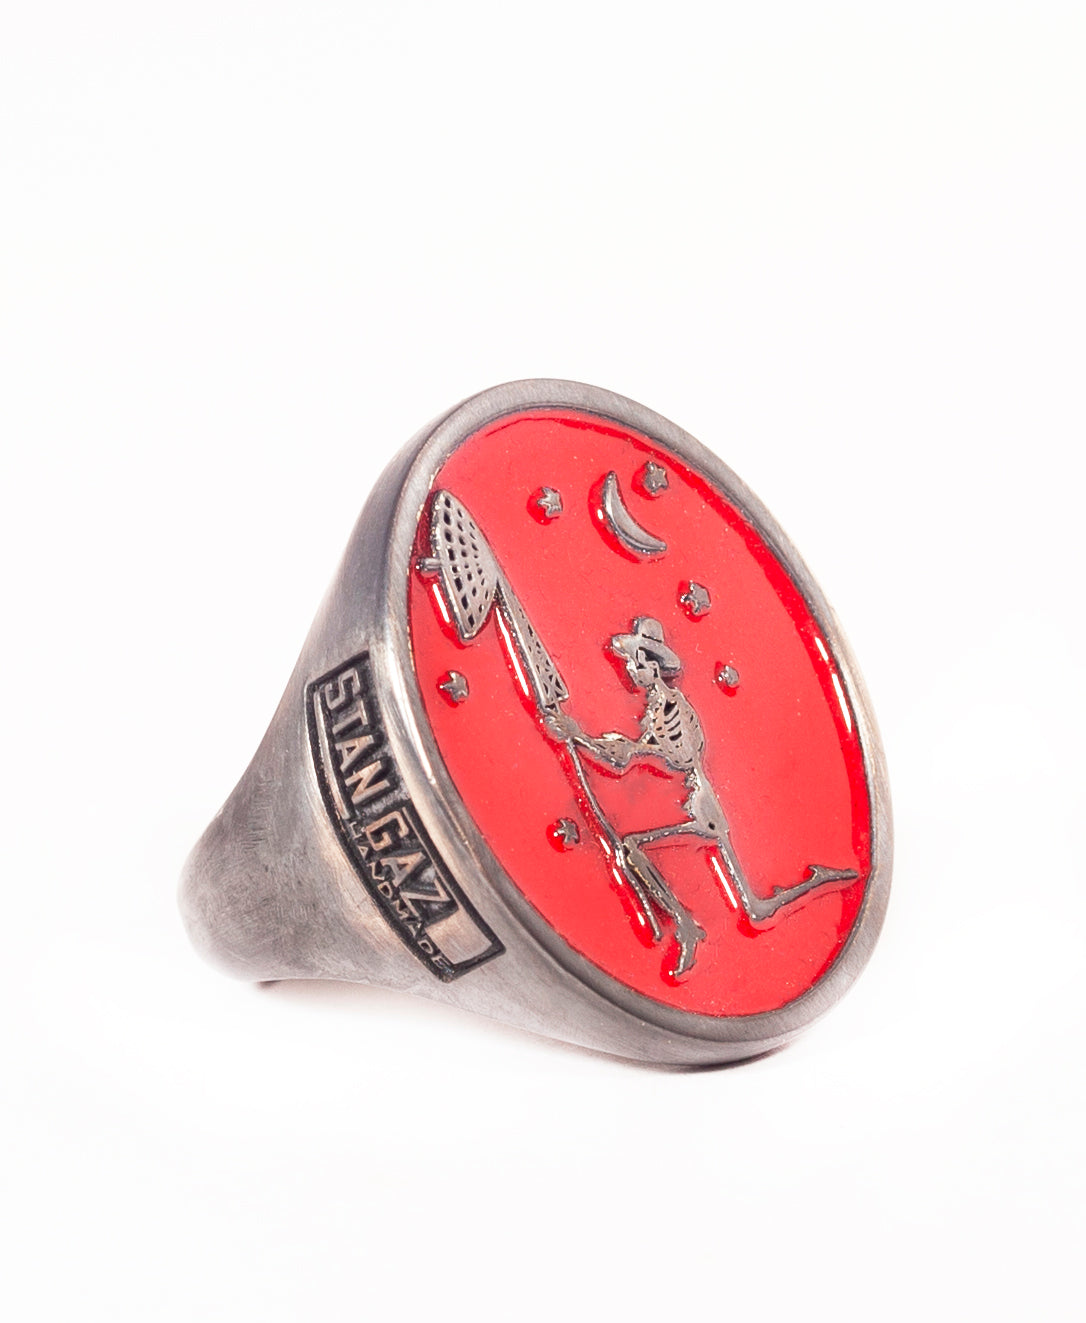 Silver skeleton signet ring with red enamel and logo.